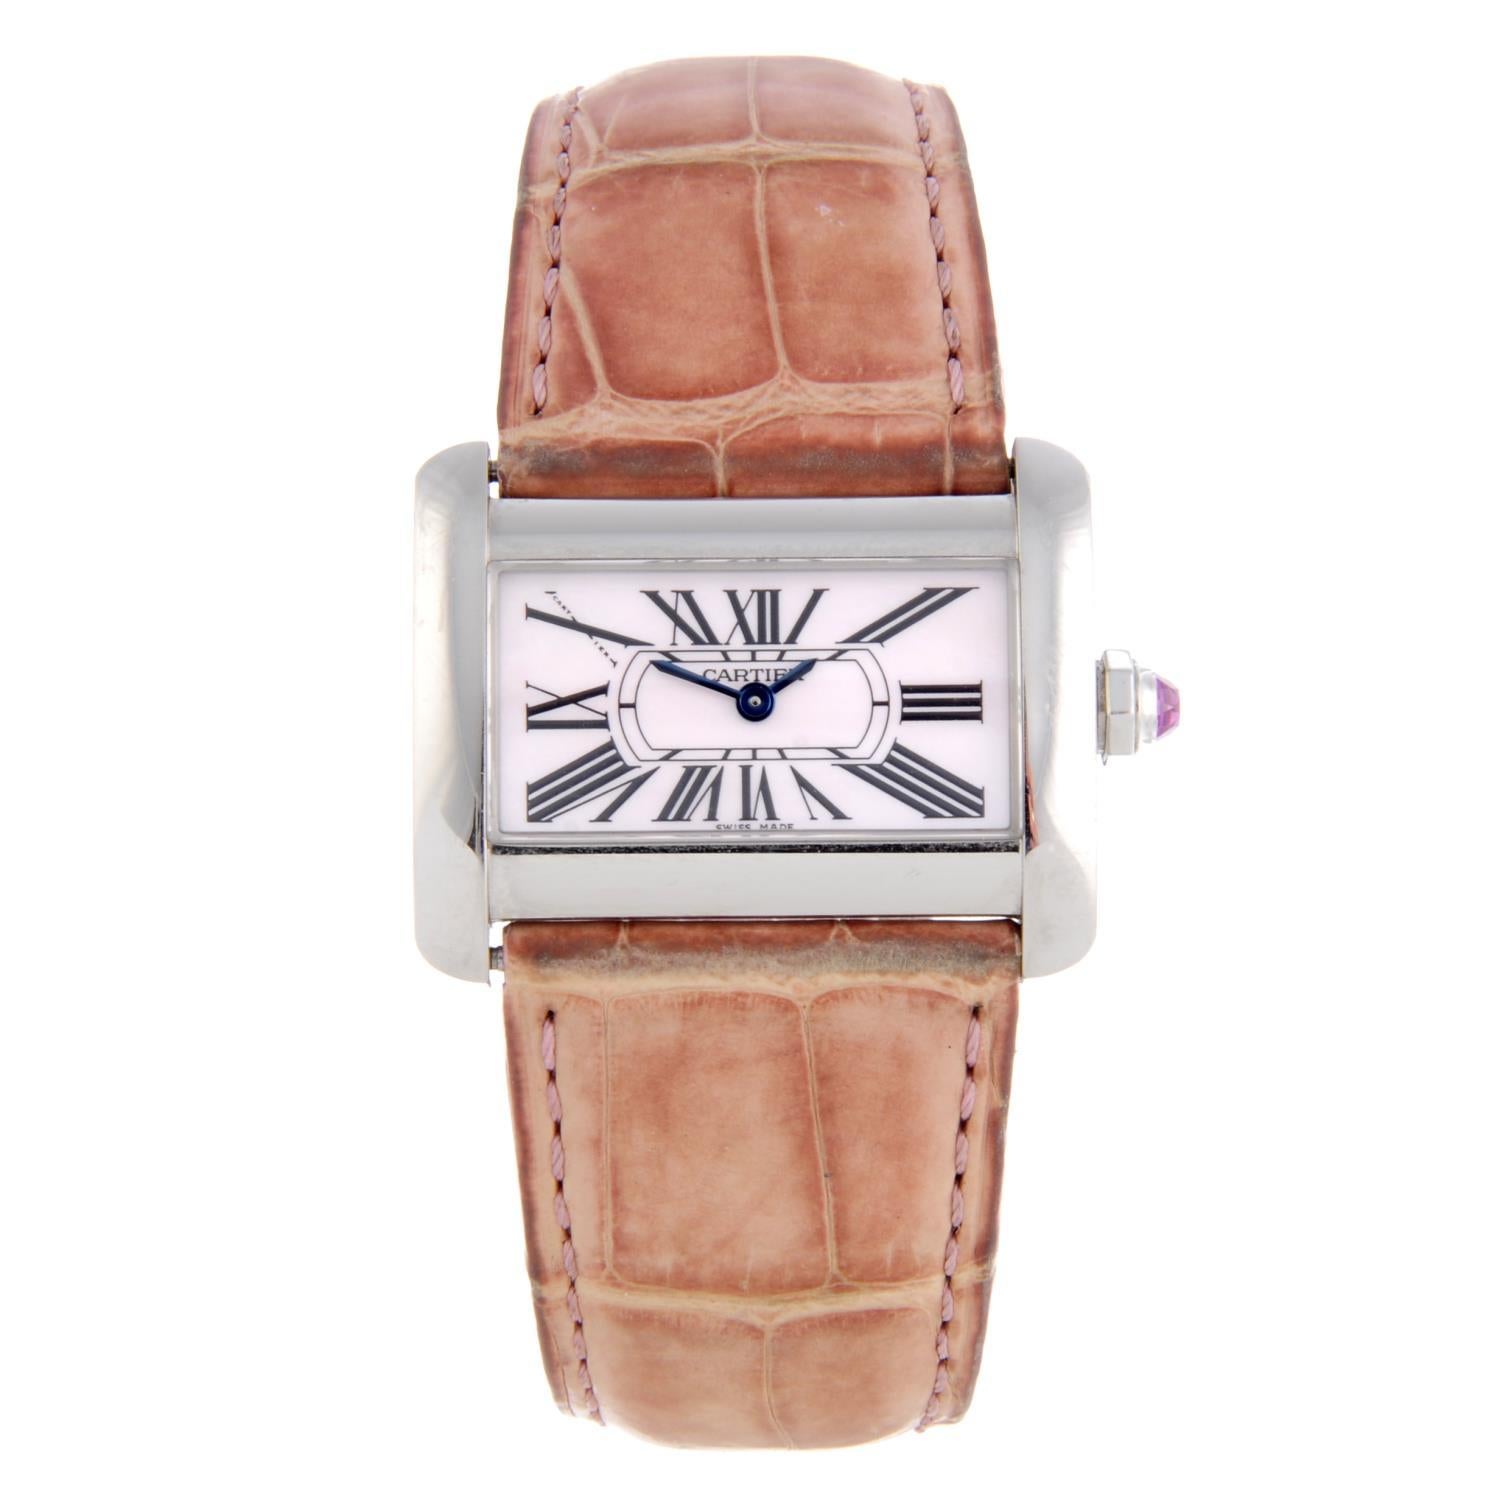 Cartier Tank Divan Wristwatch Mother of Pearl Dial Stainless Steel Case